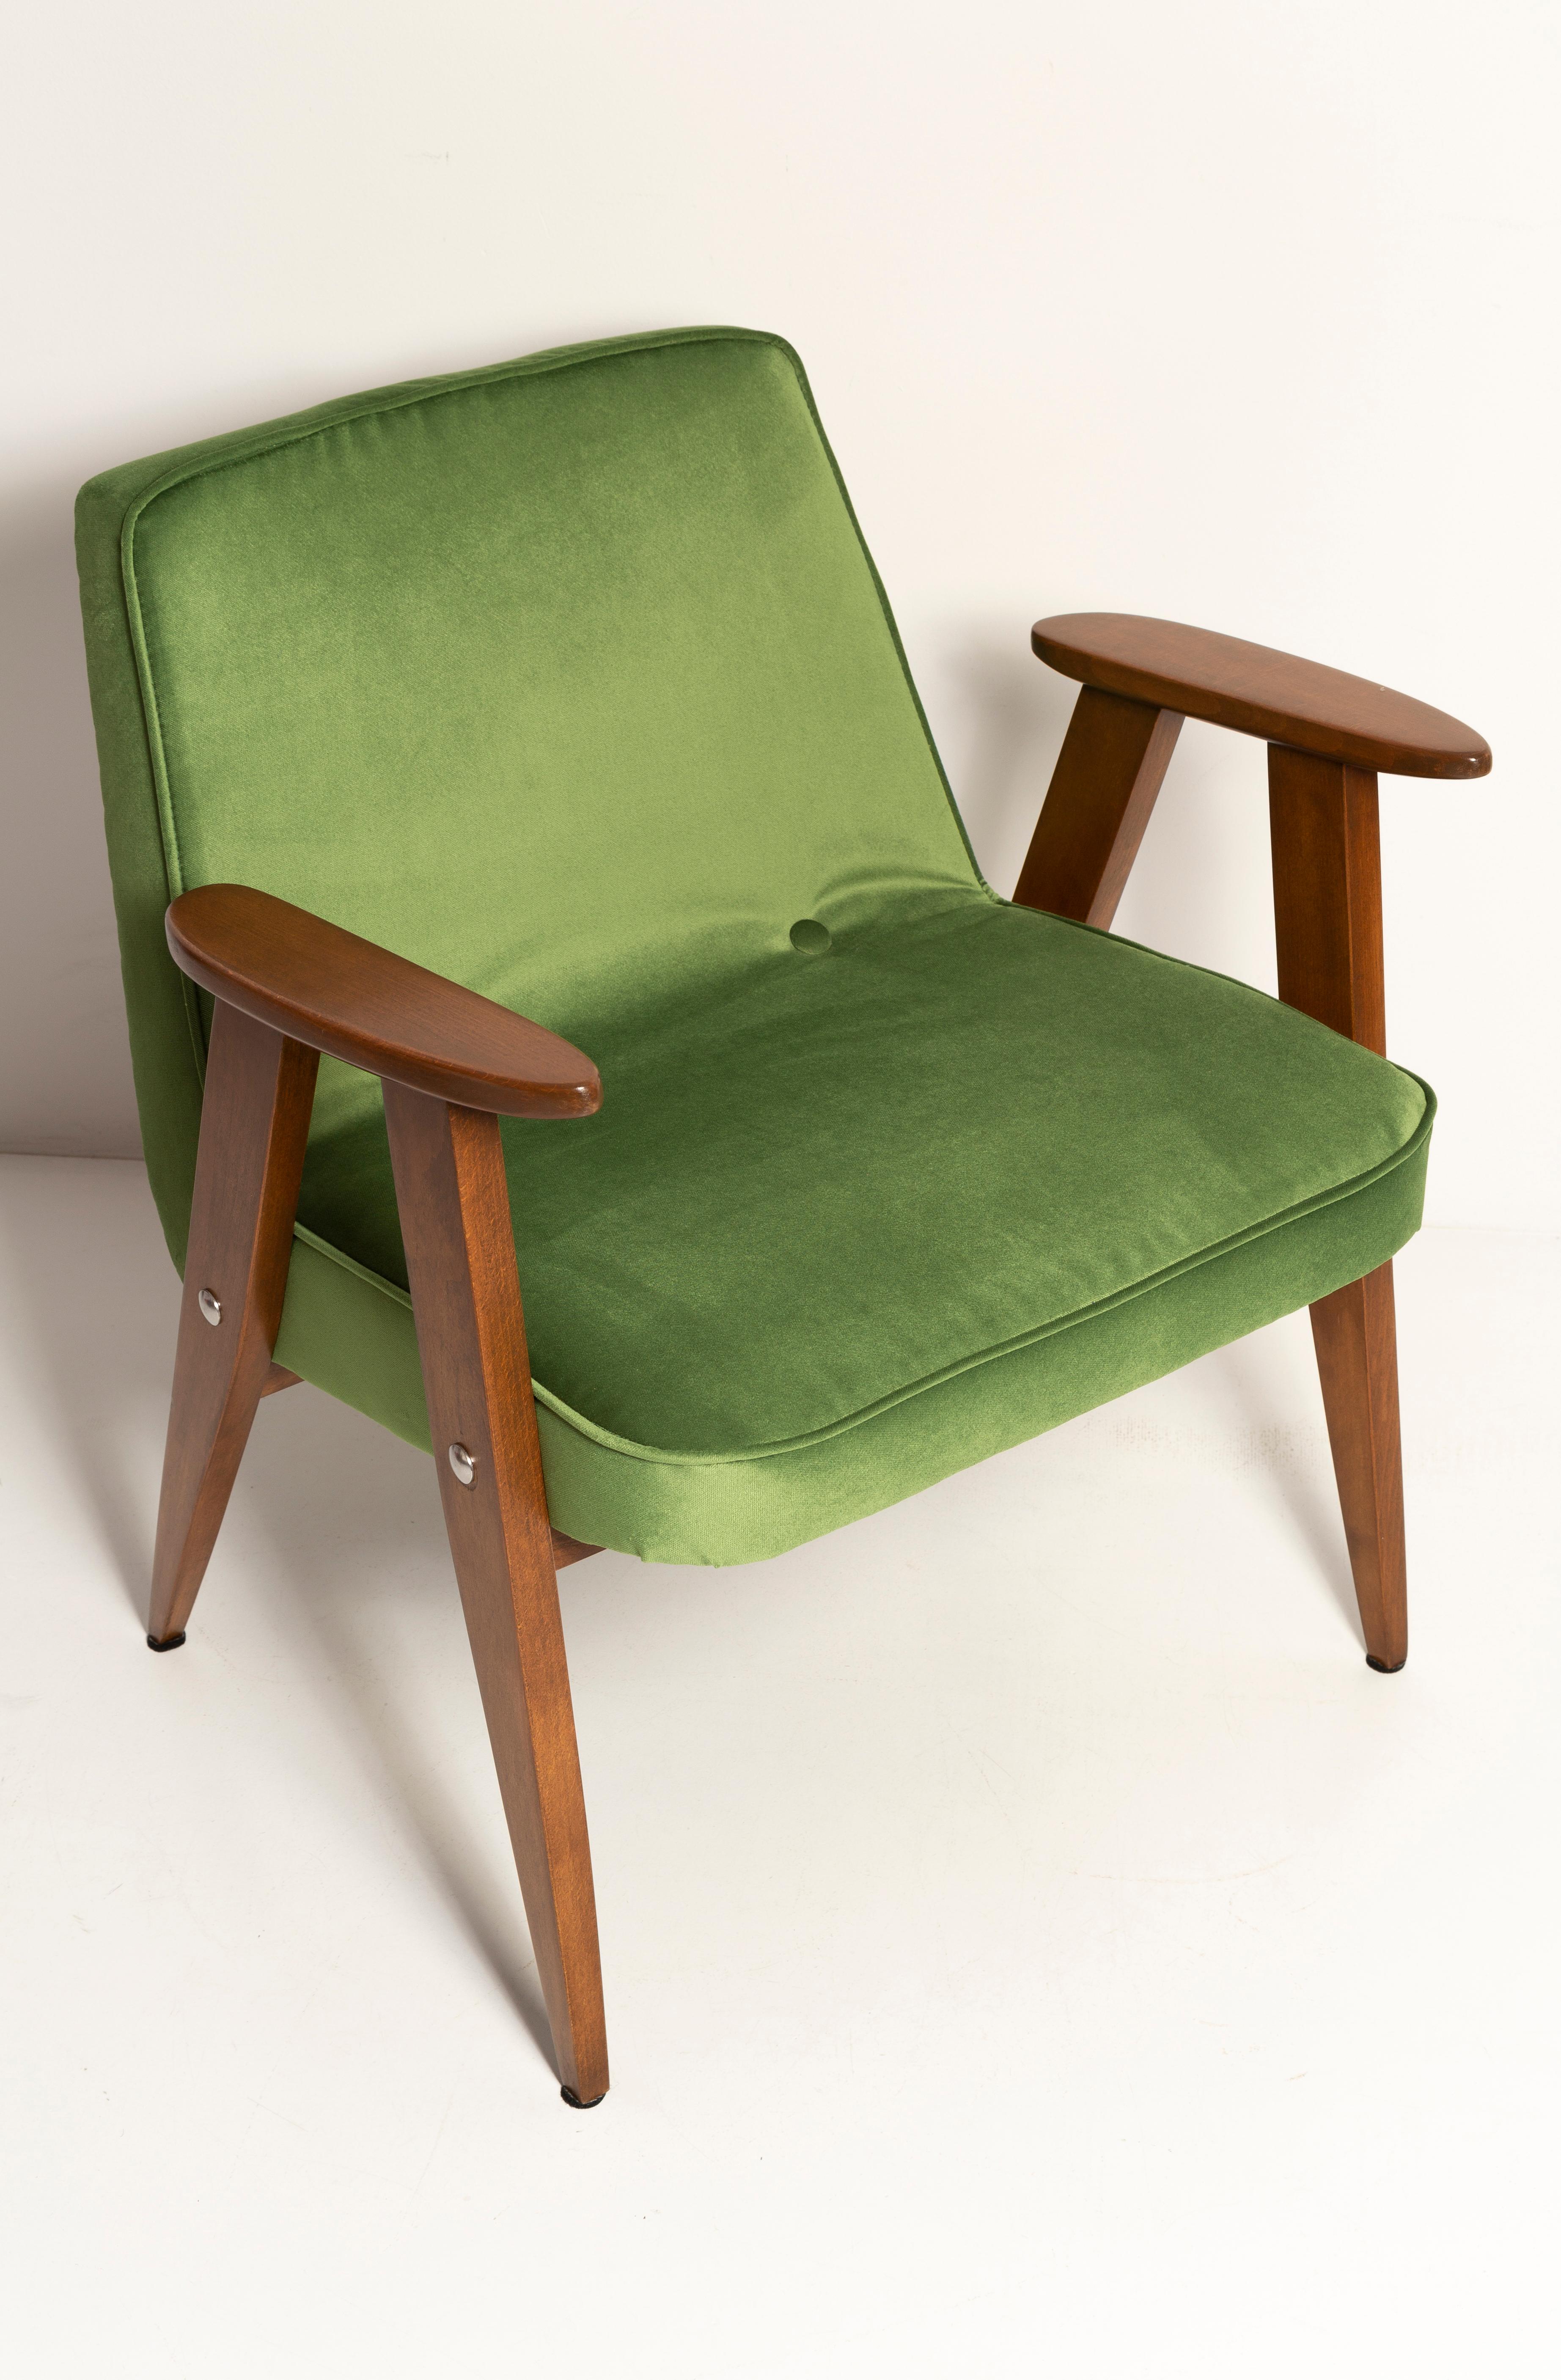 Mid-Century Modern Pair of Mid-Century 366 Armchairs, Green and Orange, by Chierowski Europe, 1960s For Sale